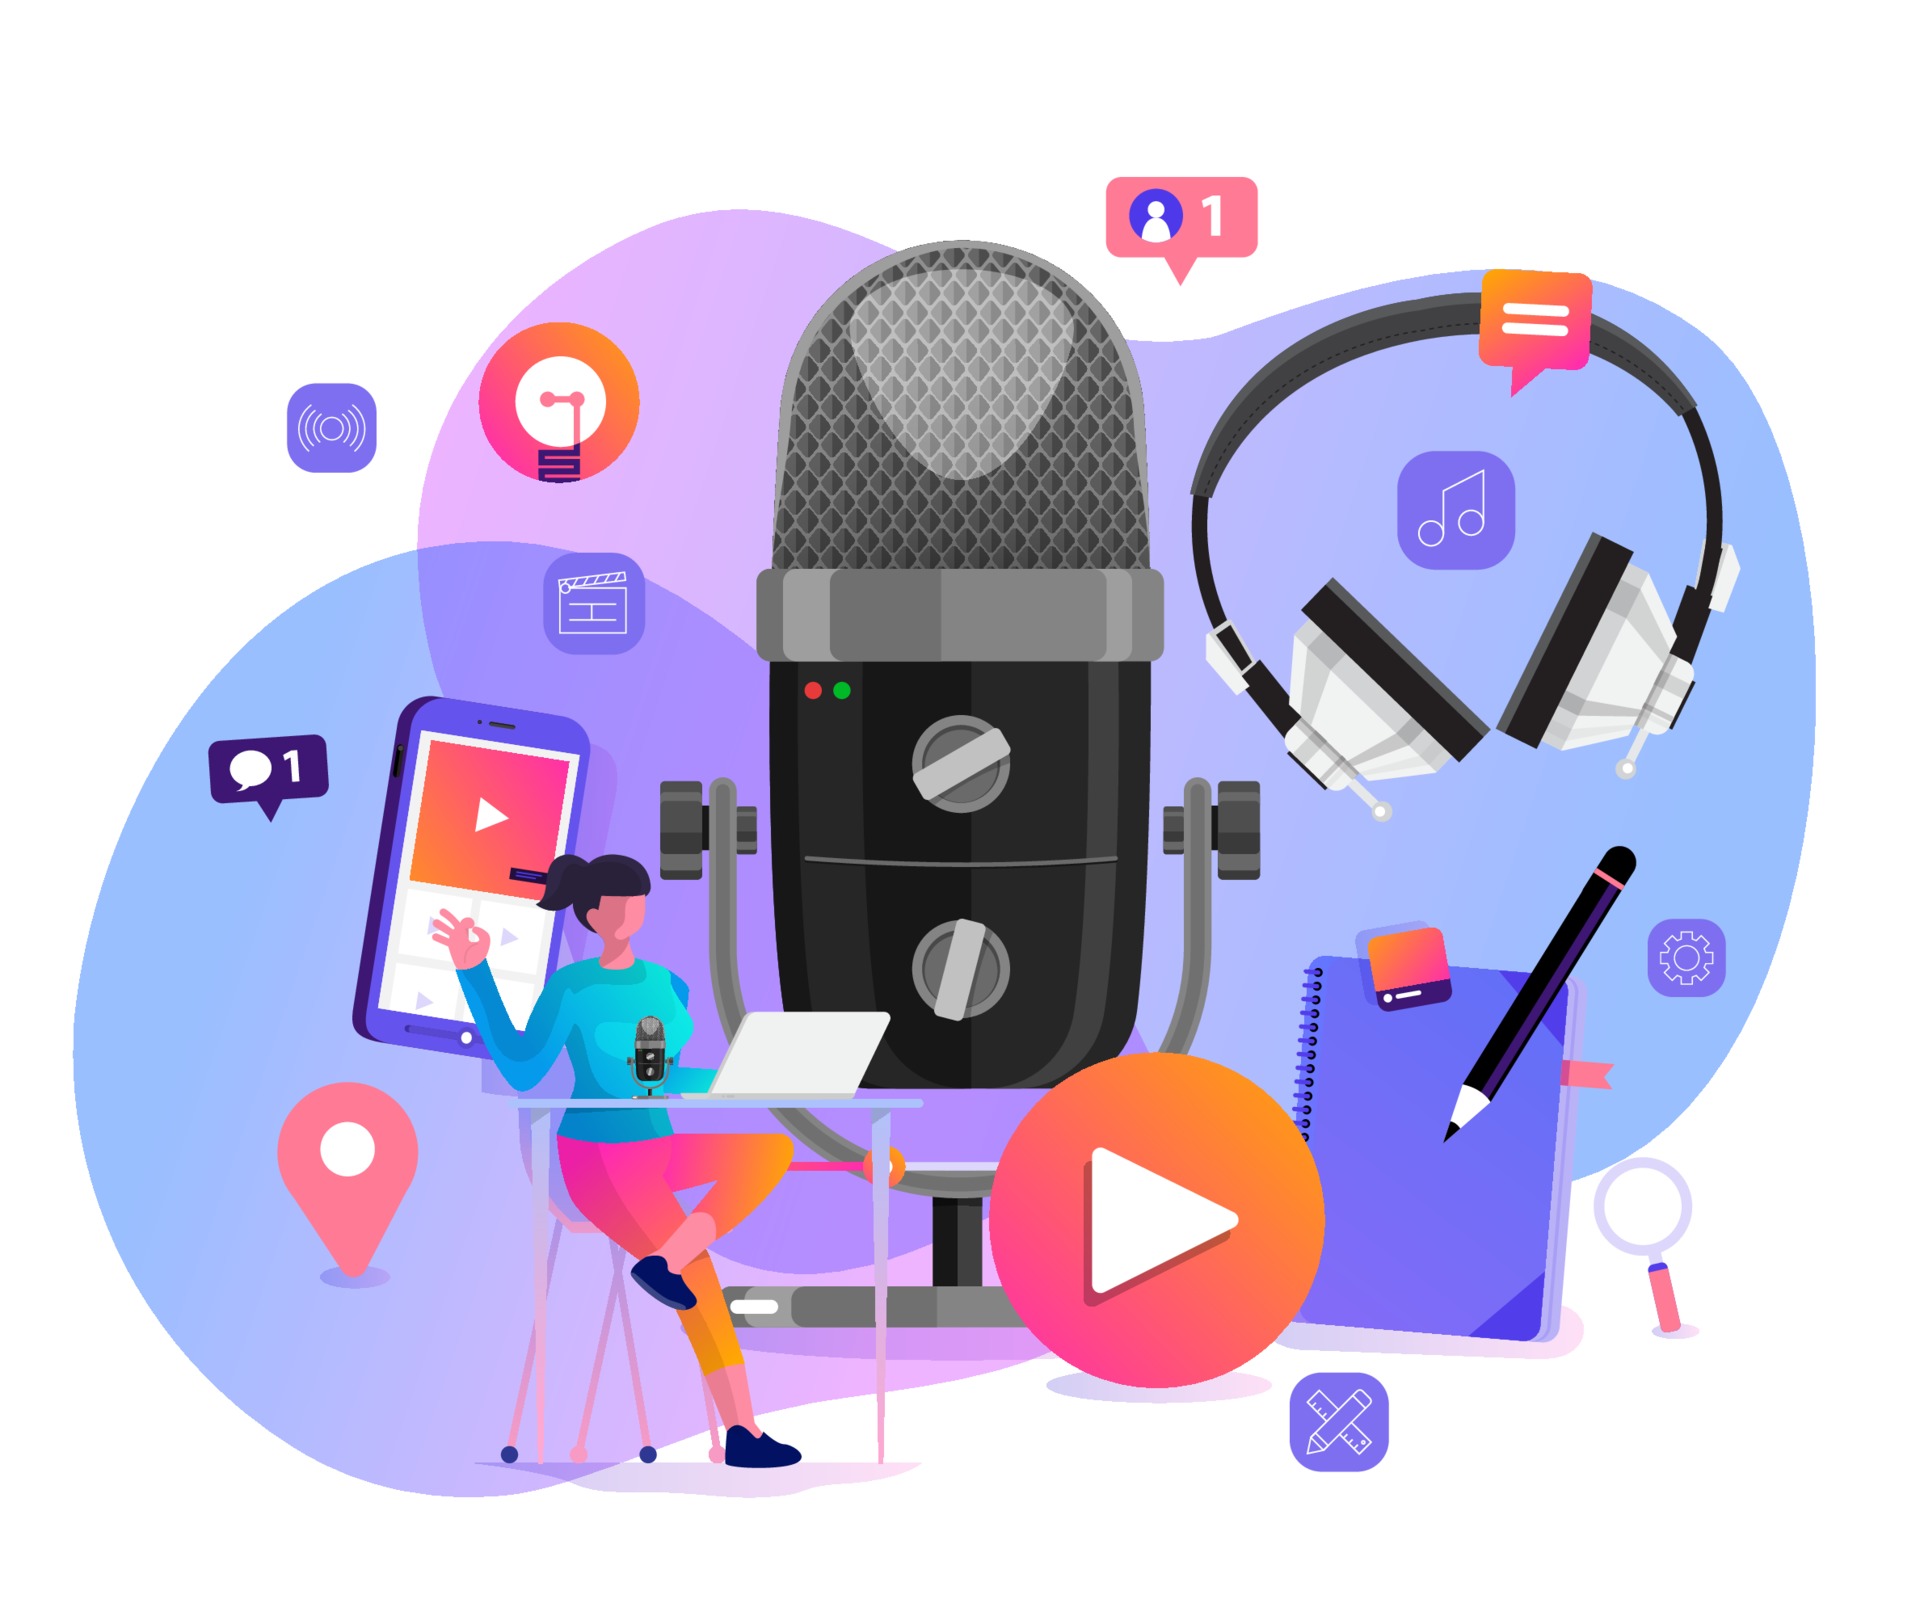 Essential SEO strategies for podcast boosting